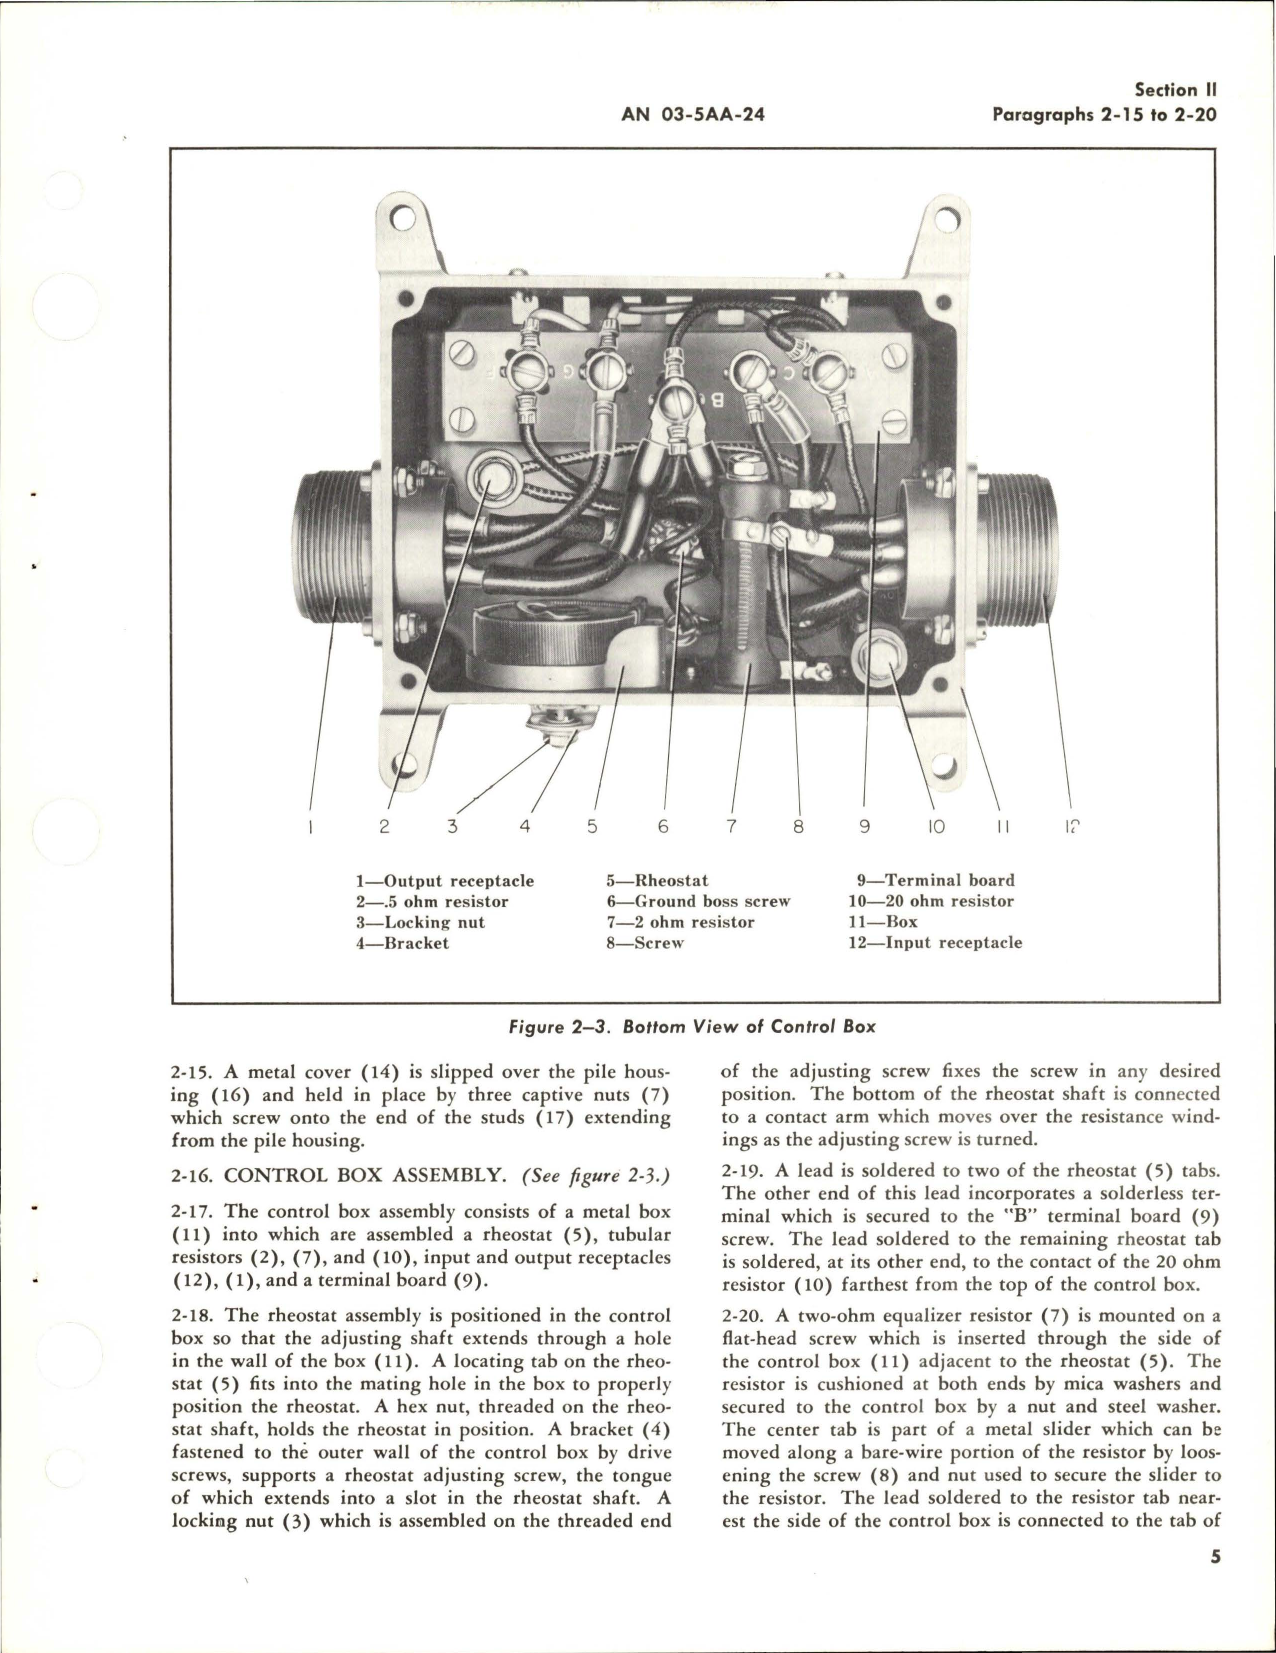 Sample page 9 from AirCorps Library document: Operation, Service and Overhaul Instructions with Parts Catalog for D-C Carbon Pile Voltage Regulator Control Box - Models 1002-1-A and 1002-5-A